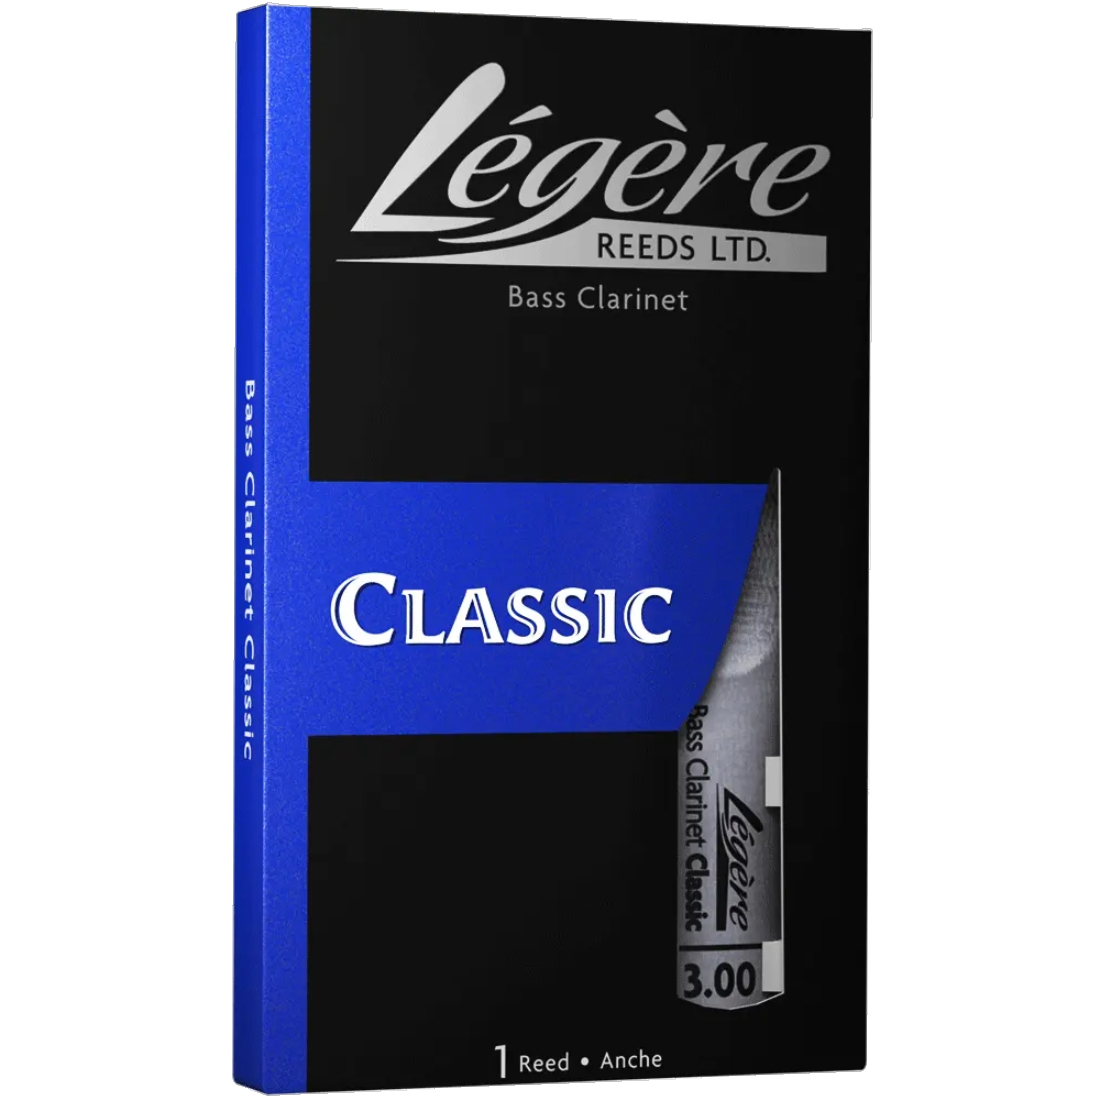 Black and blue box of classic Legere classic bass clarinet reeds